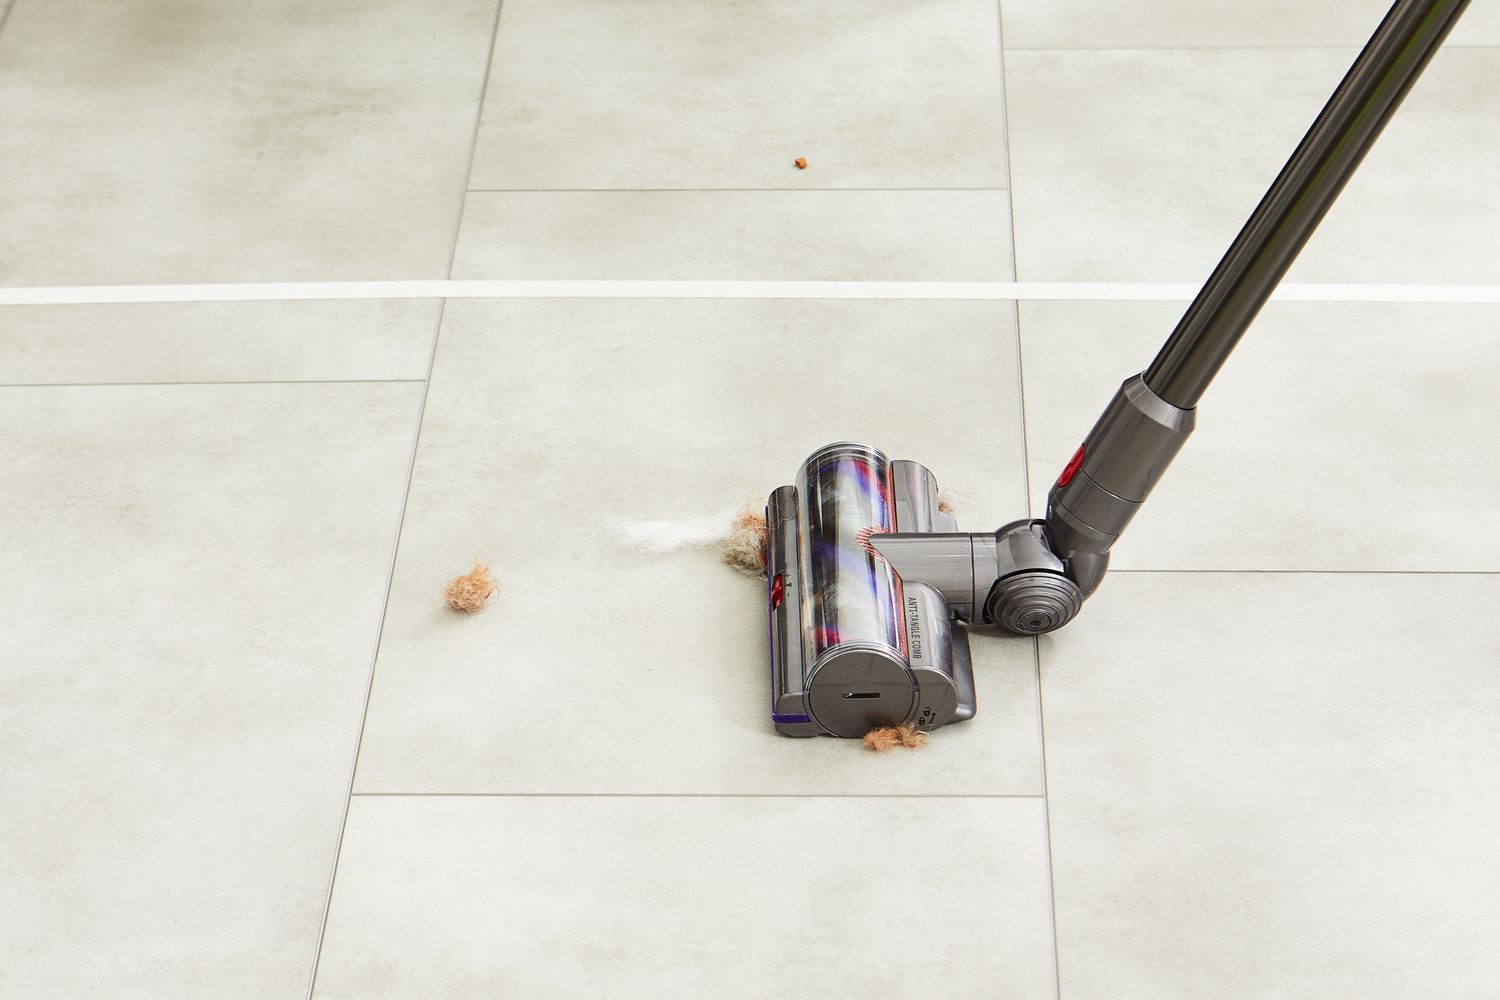 Dyson V15 Detect Cordless Vacuum Cleaner cleaning fur from the tile floor